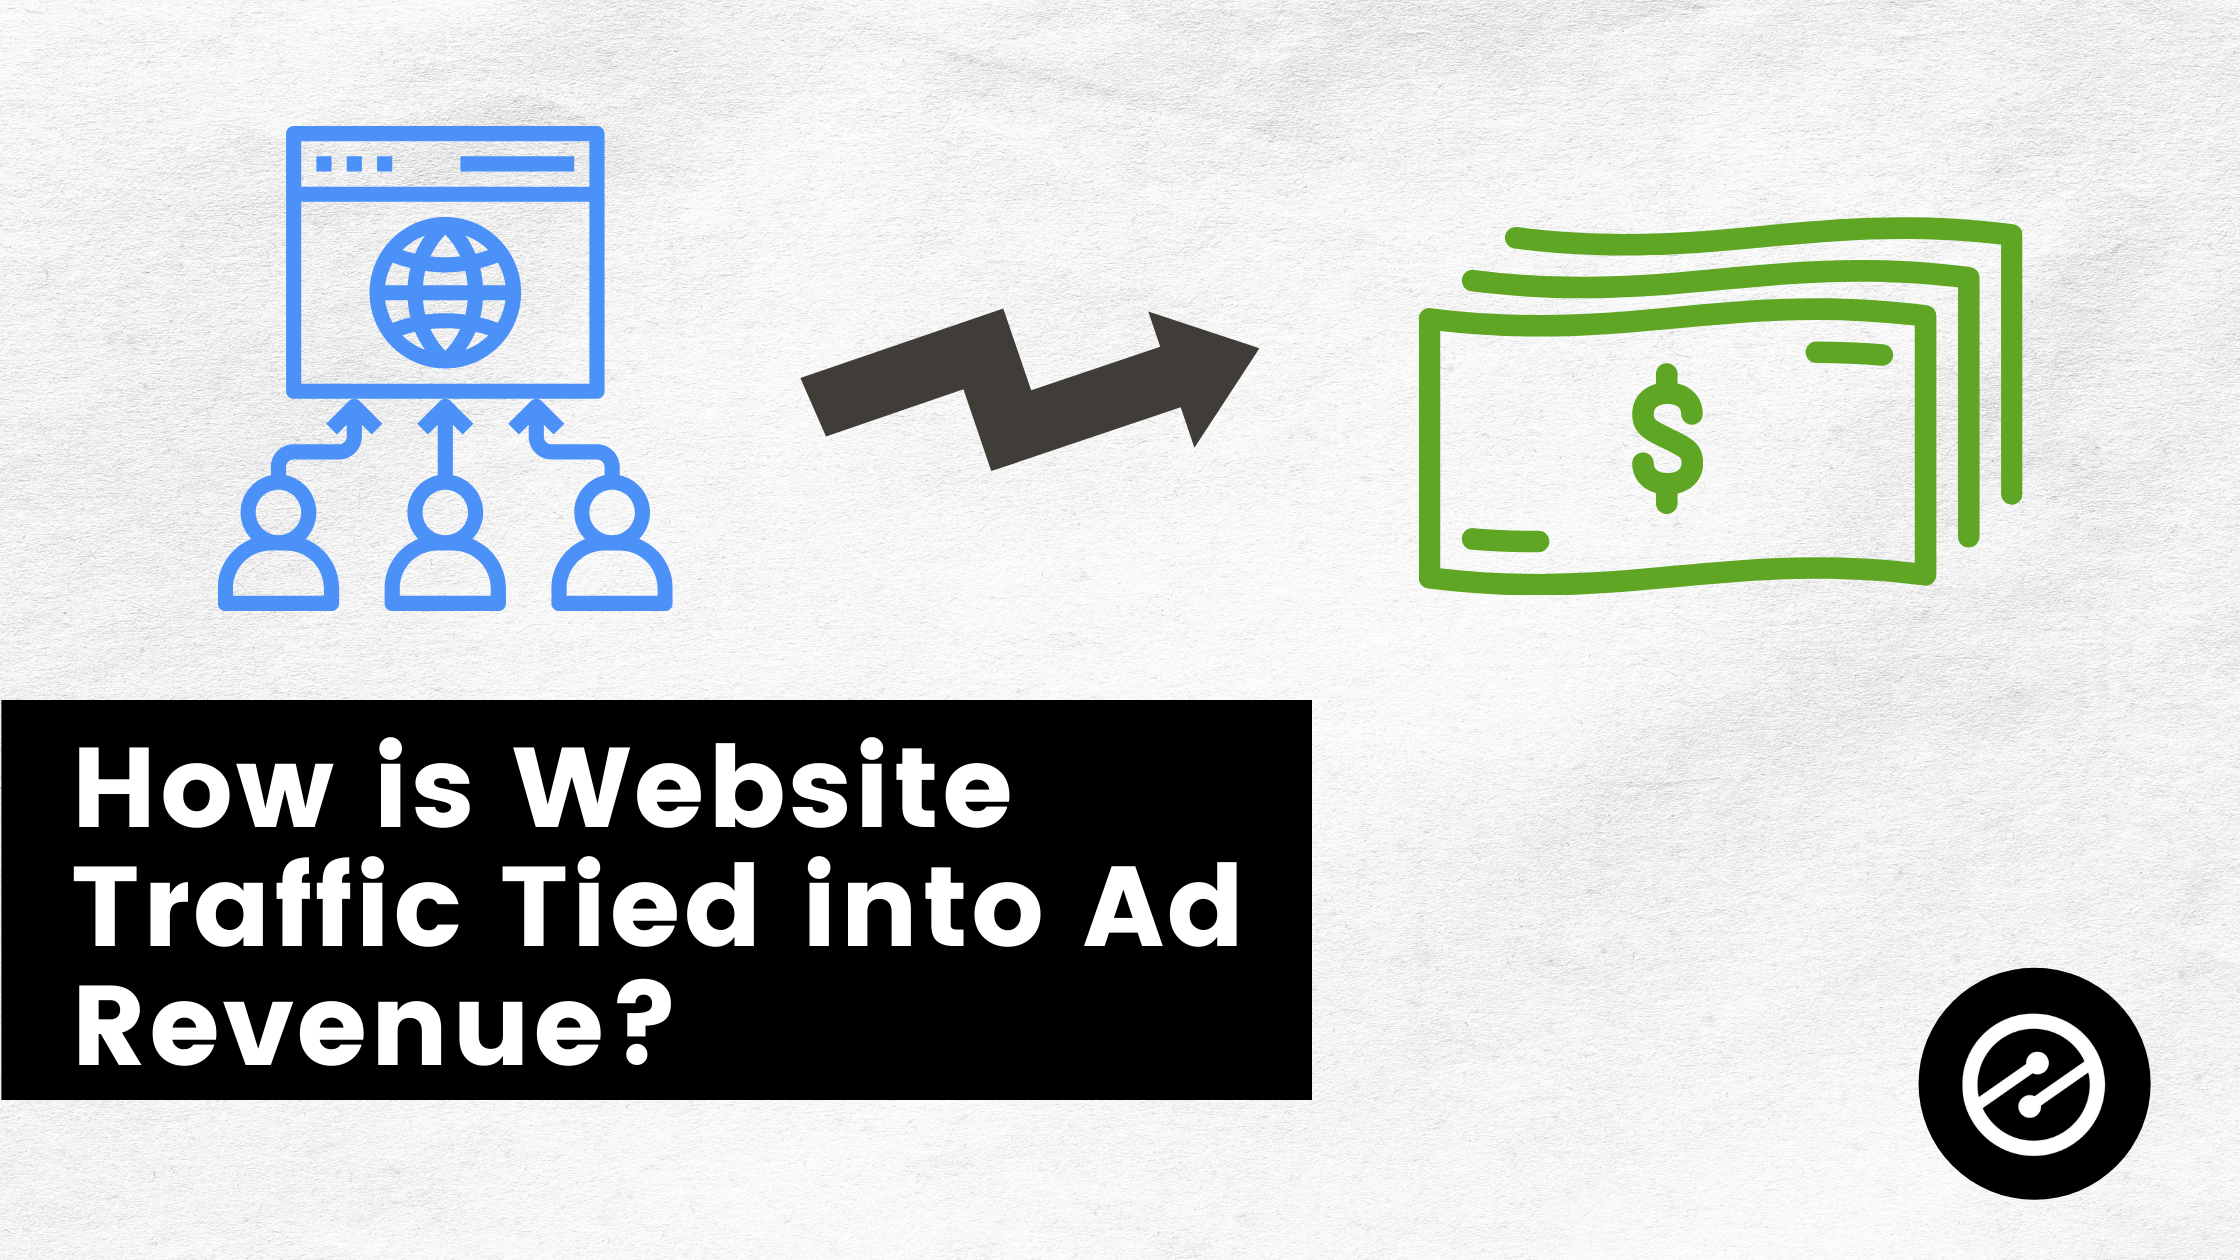 How is Website Traffic Tied Into Ad Revenue?